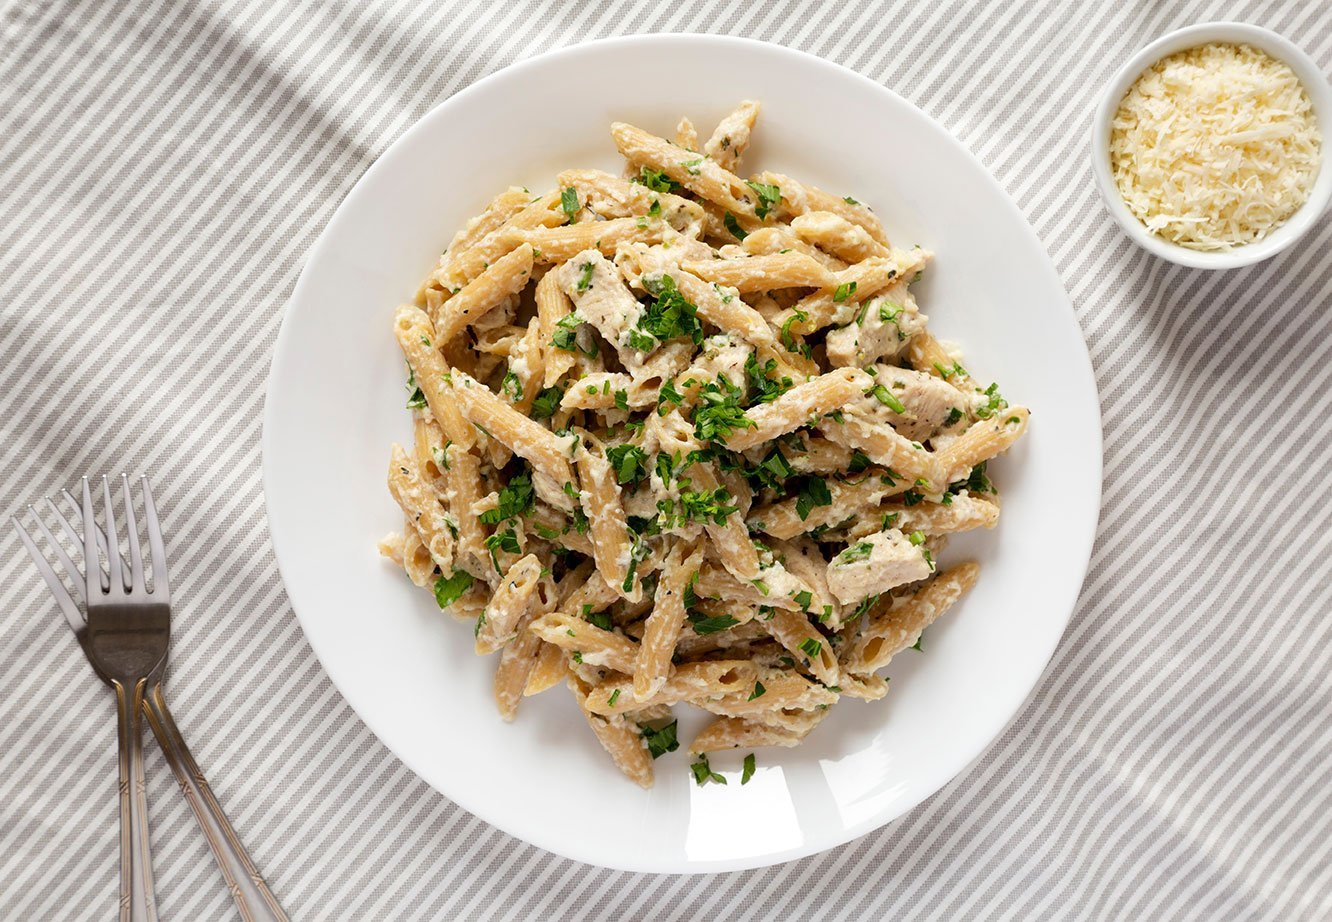 Homemade Chicken Alfredo Penne With Parsley On Cloth, Top View.